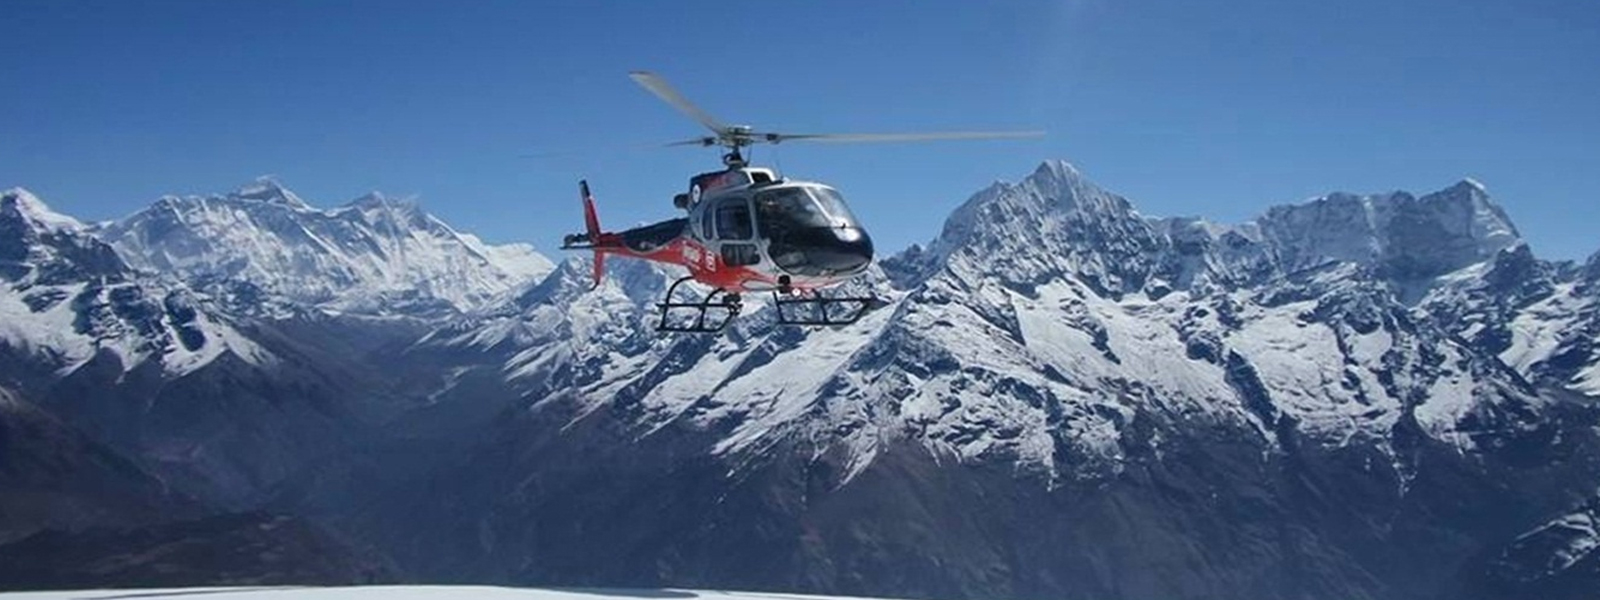 Everest Base Camp Fly Back By Helicopter - 12 Days